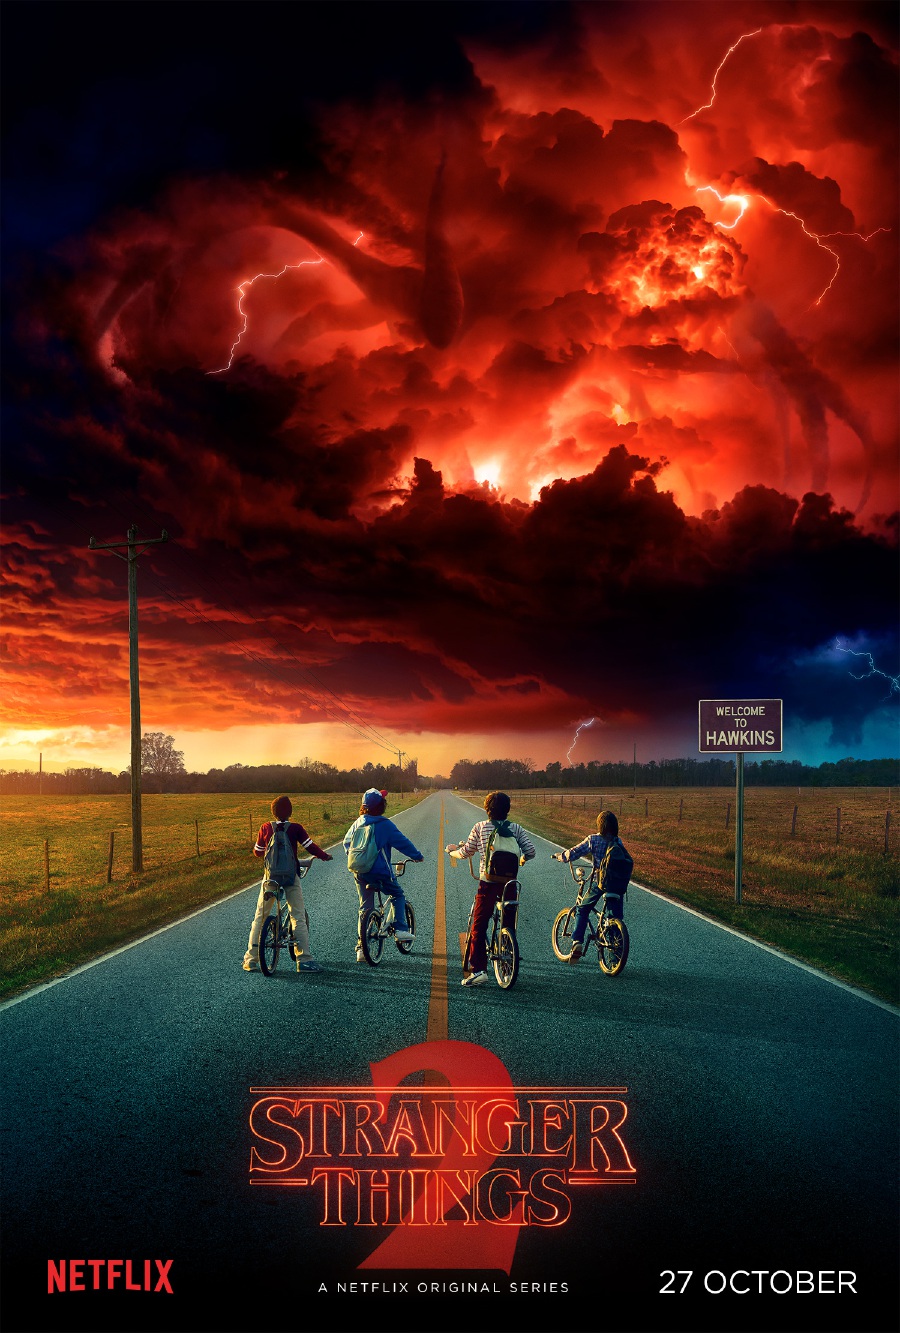 Netflix also released an official key art for Season 2 today.